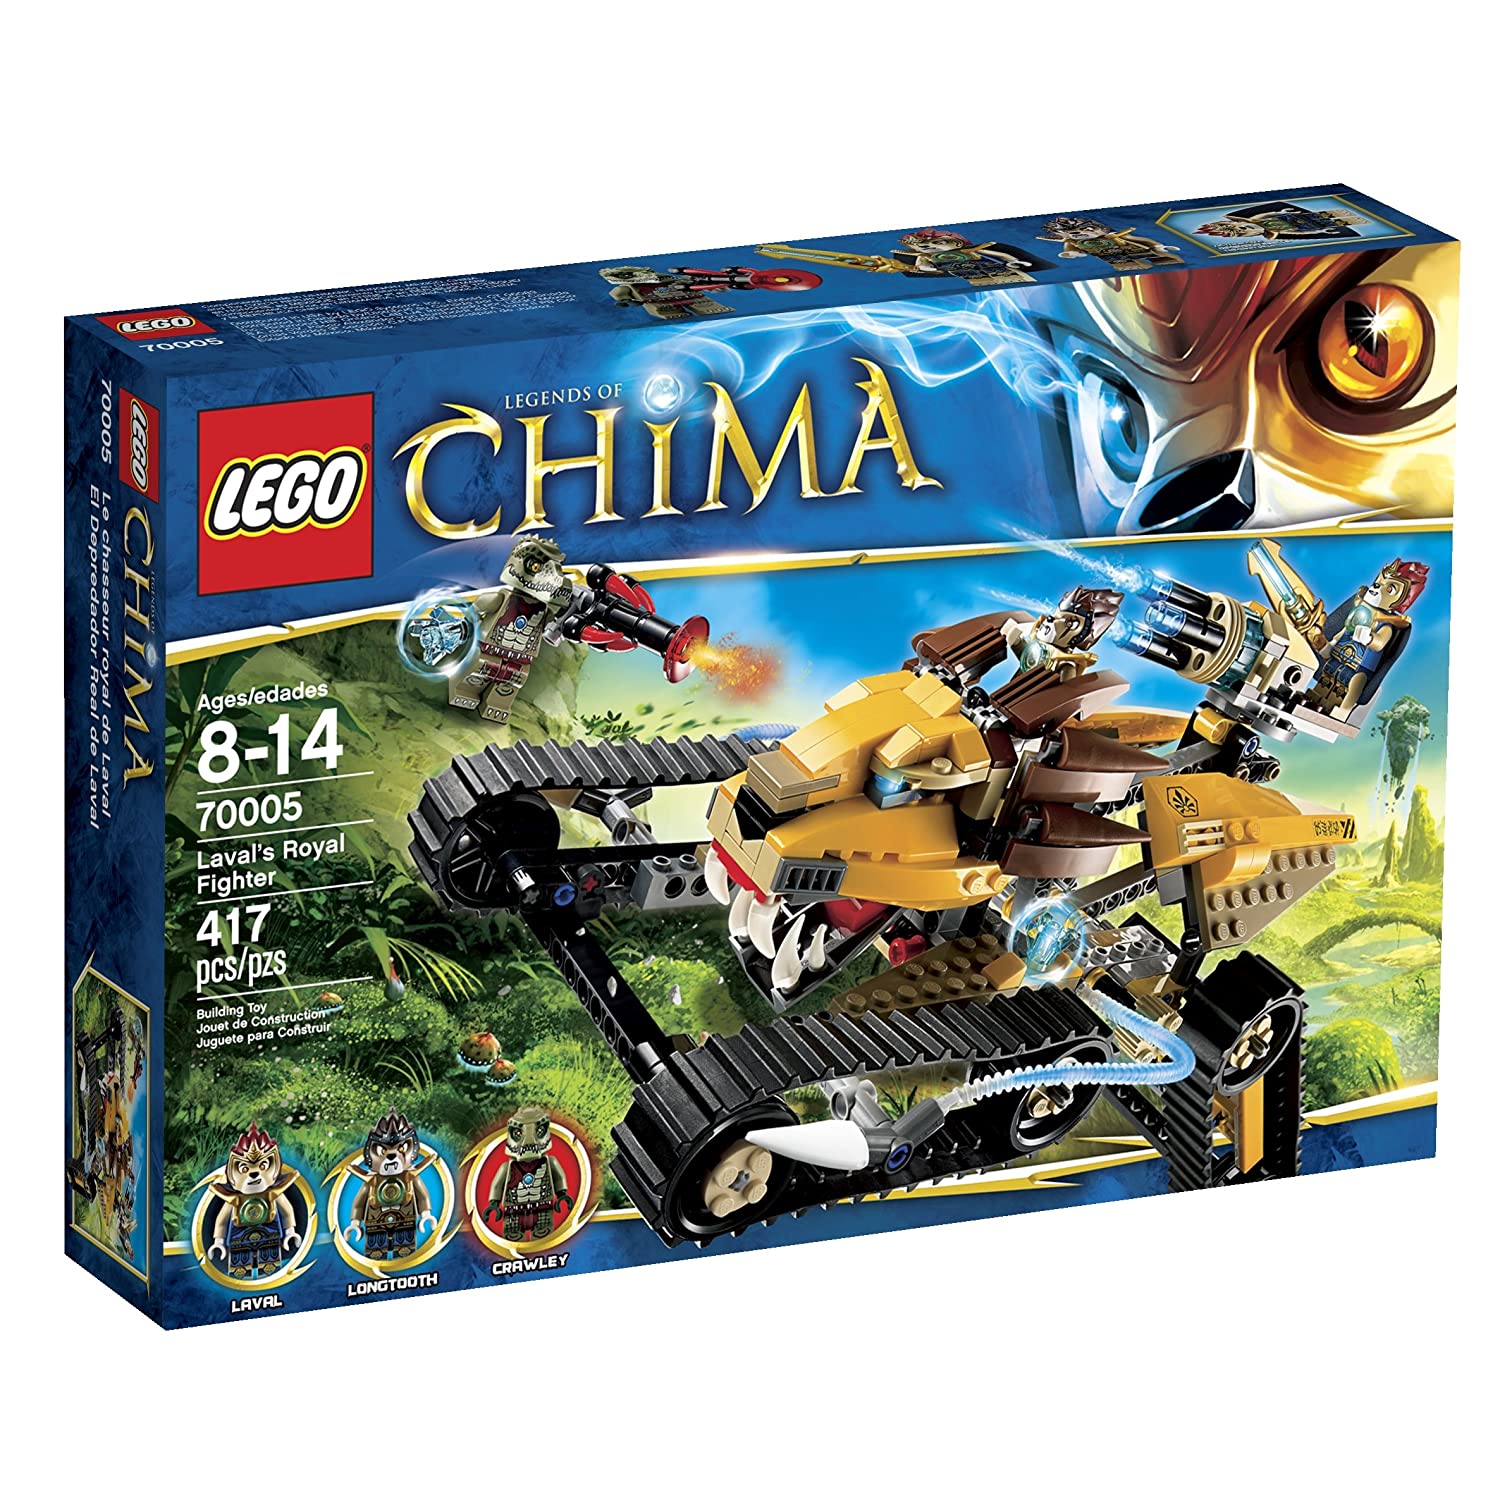 9 Best LEGO Chima Sets 2022 - Buying Guide & Reviews 7